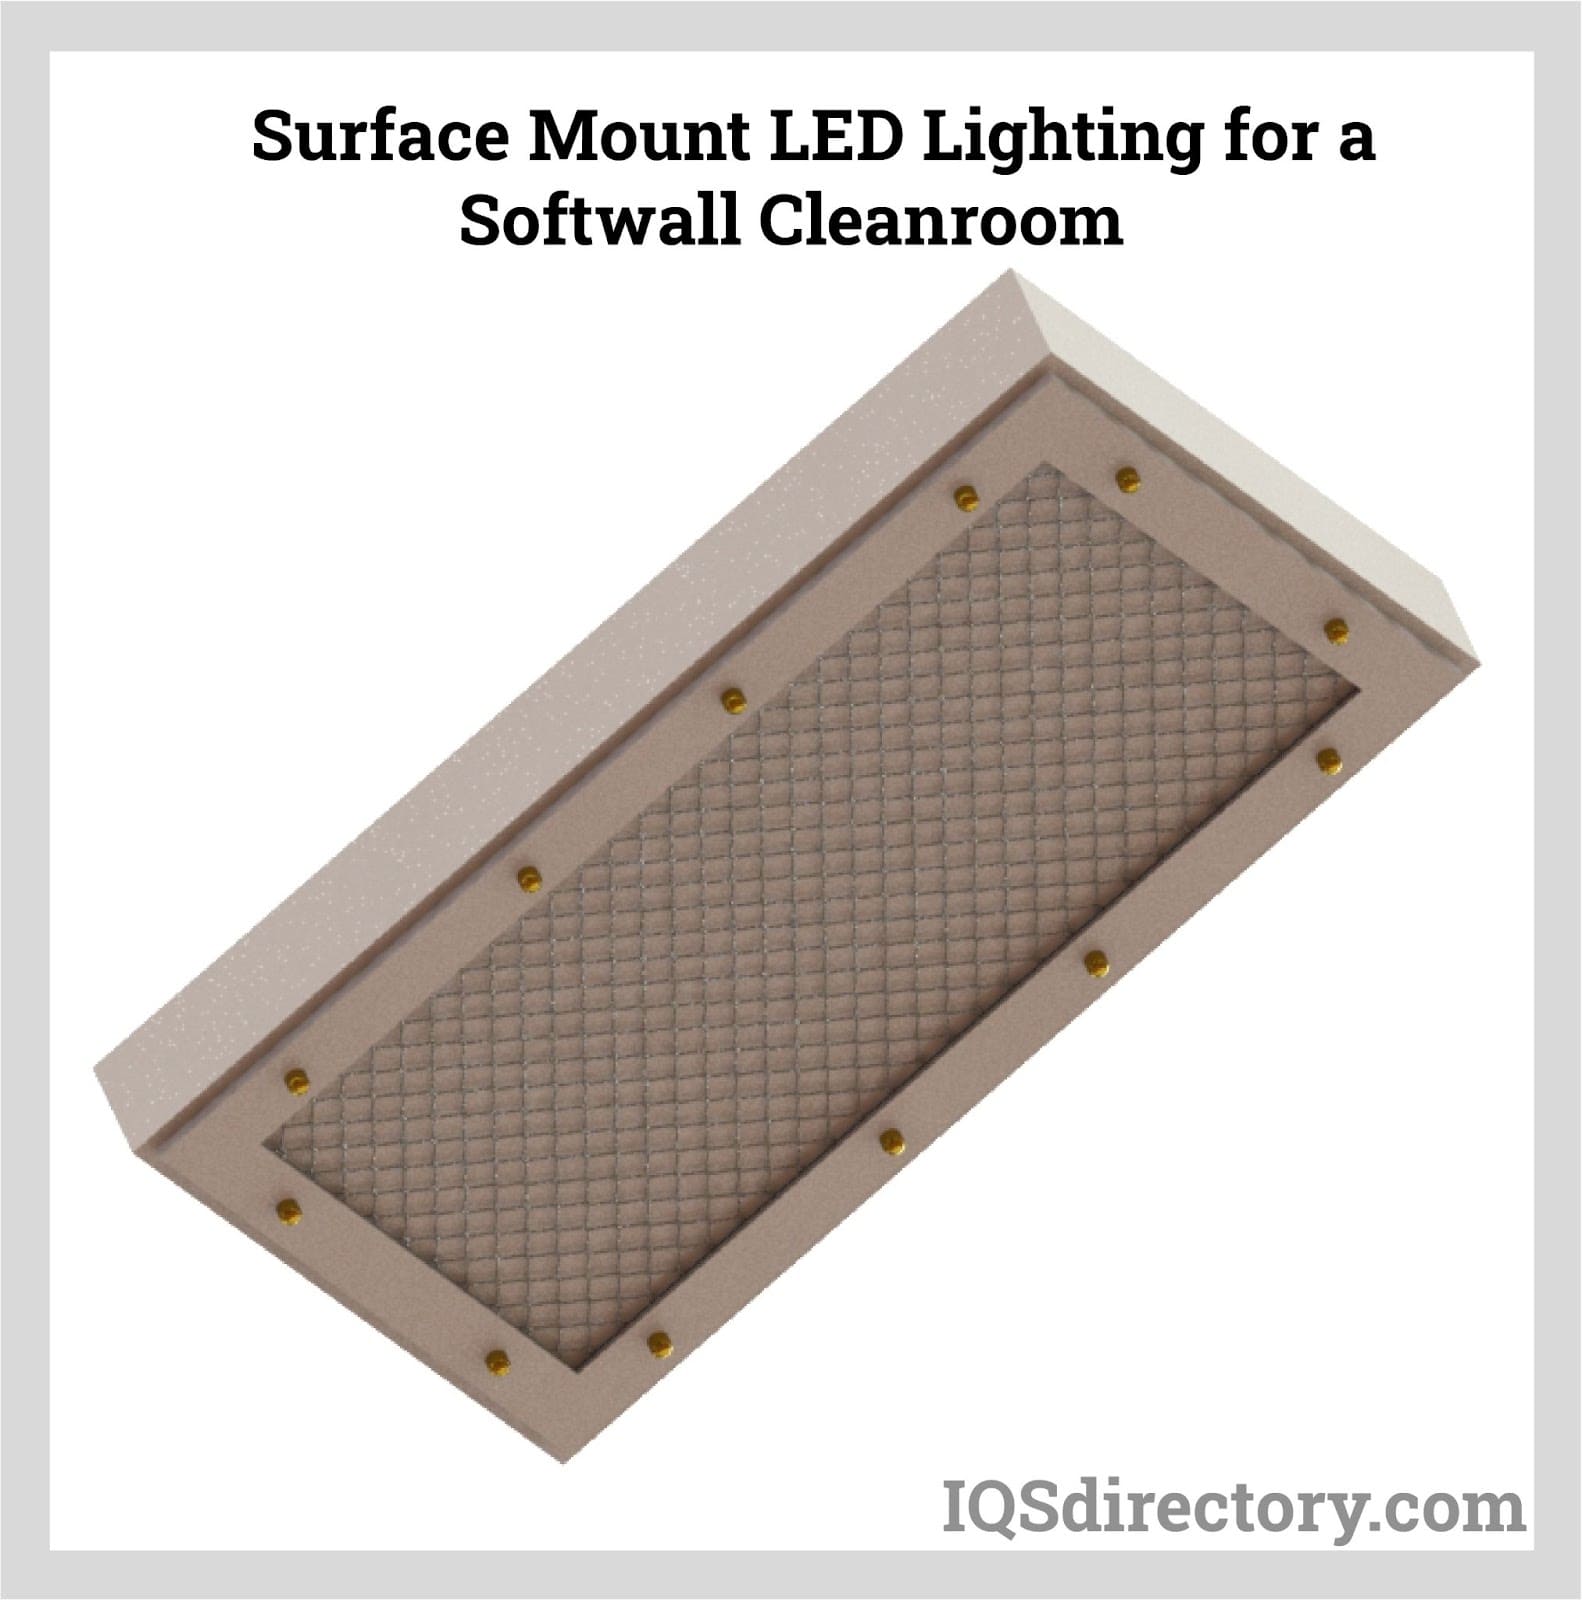 Surface Mount LED Lighting for a Softwall Cleanroom